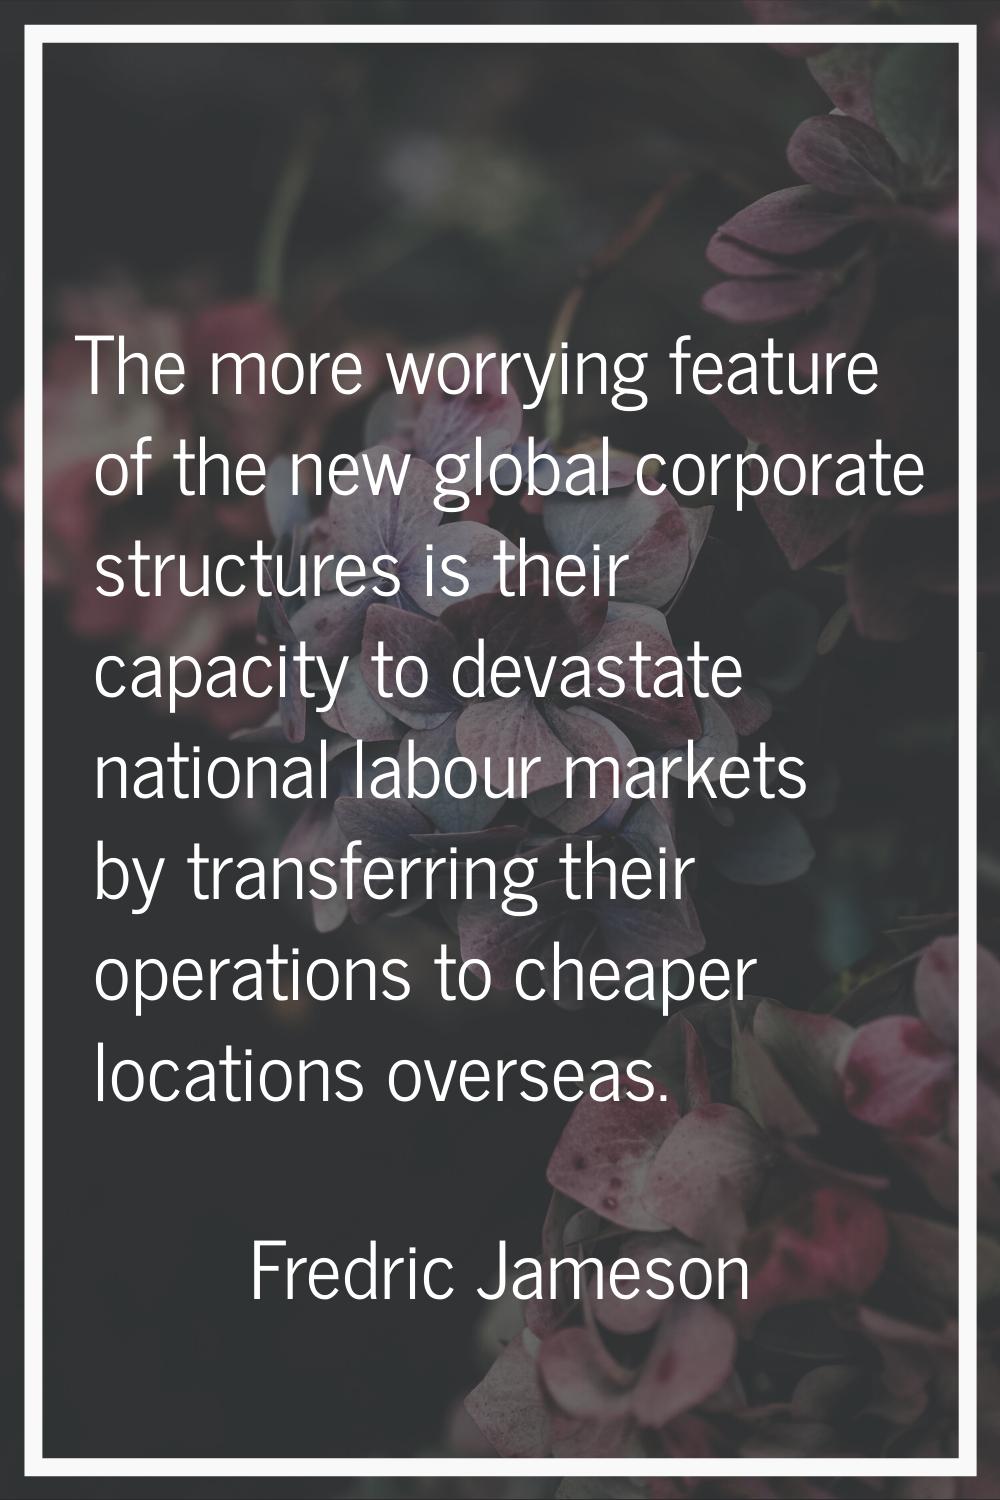 The more worrying feature of the new global corporate structures is their capacity to devastate nat